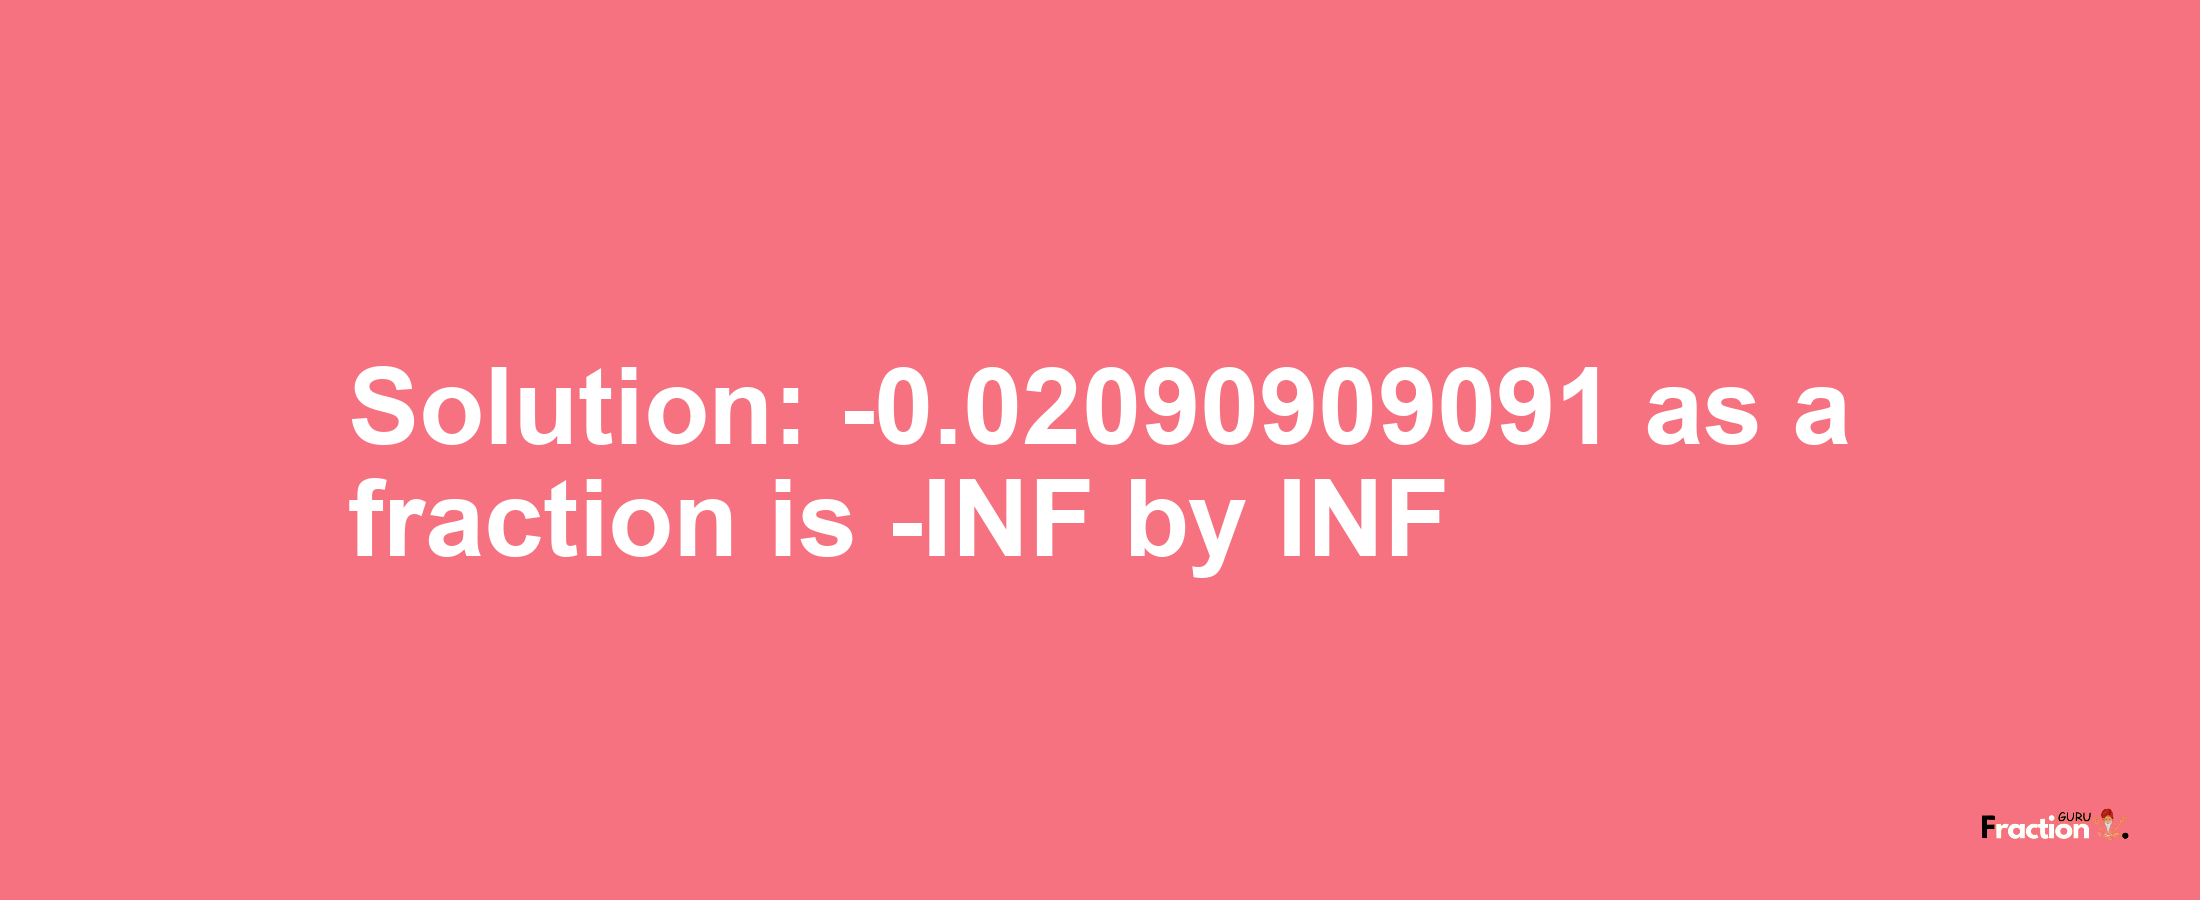 Solution:-0.02090909091 as a fraction is -INF/INF